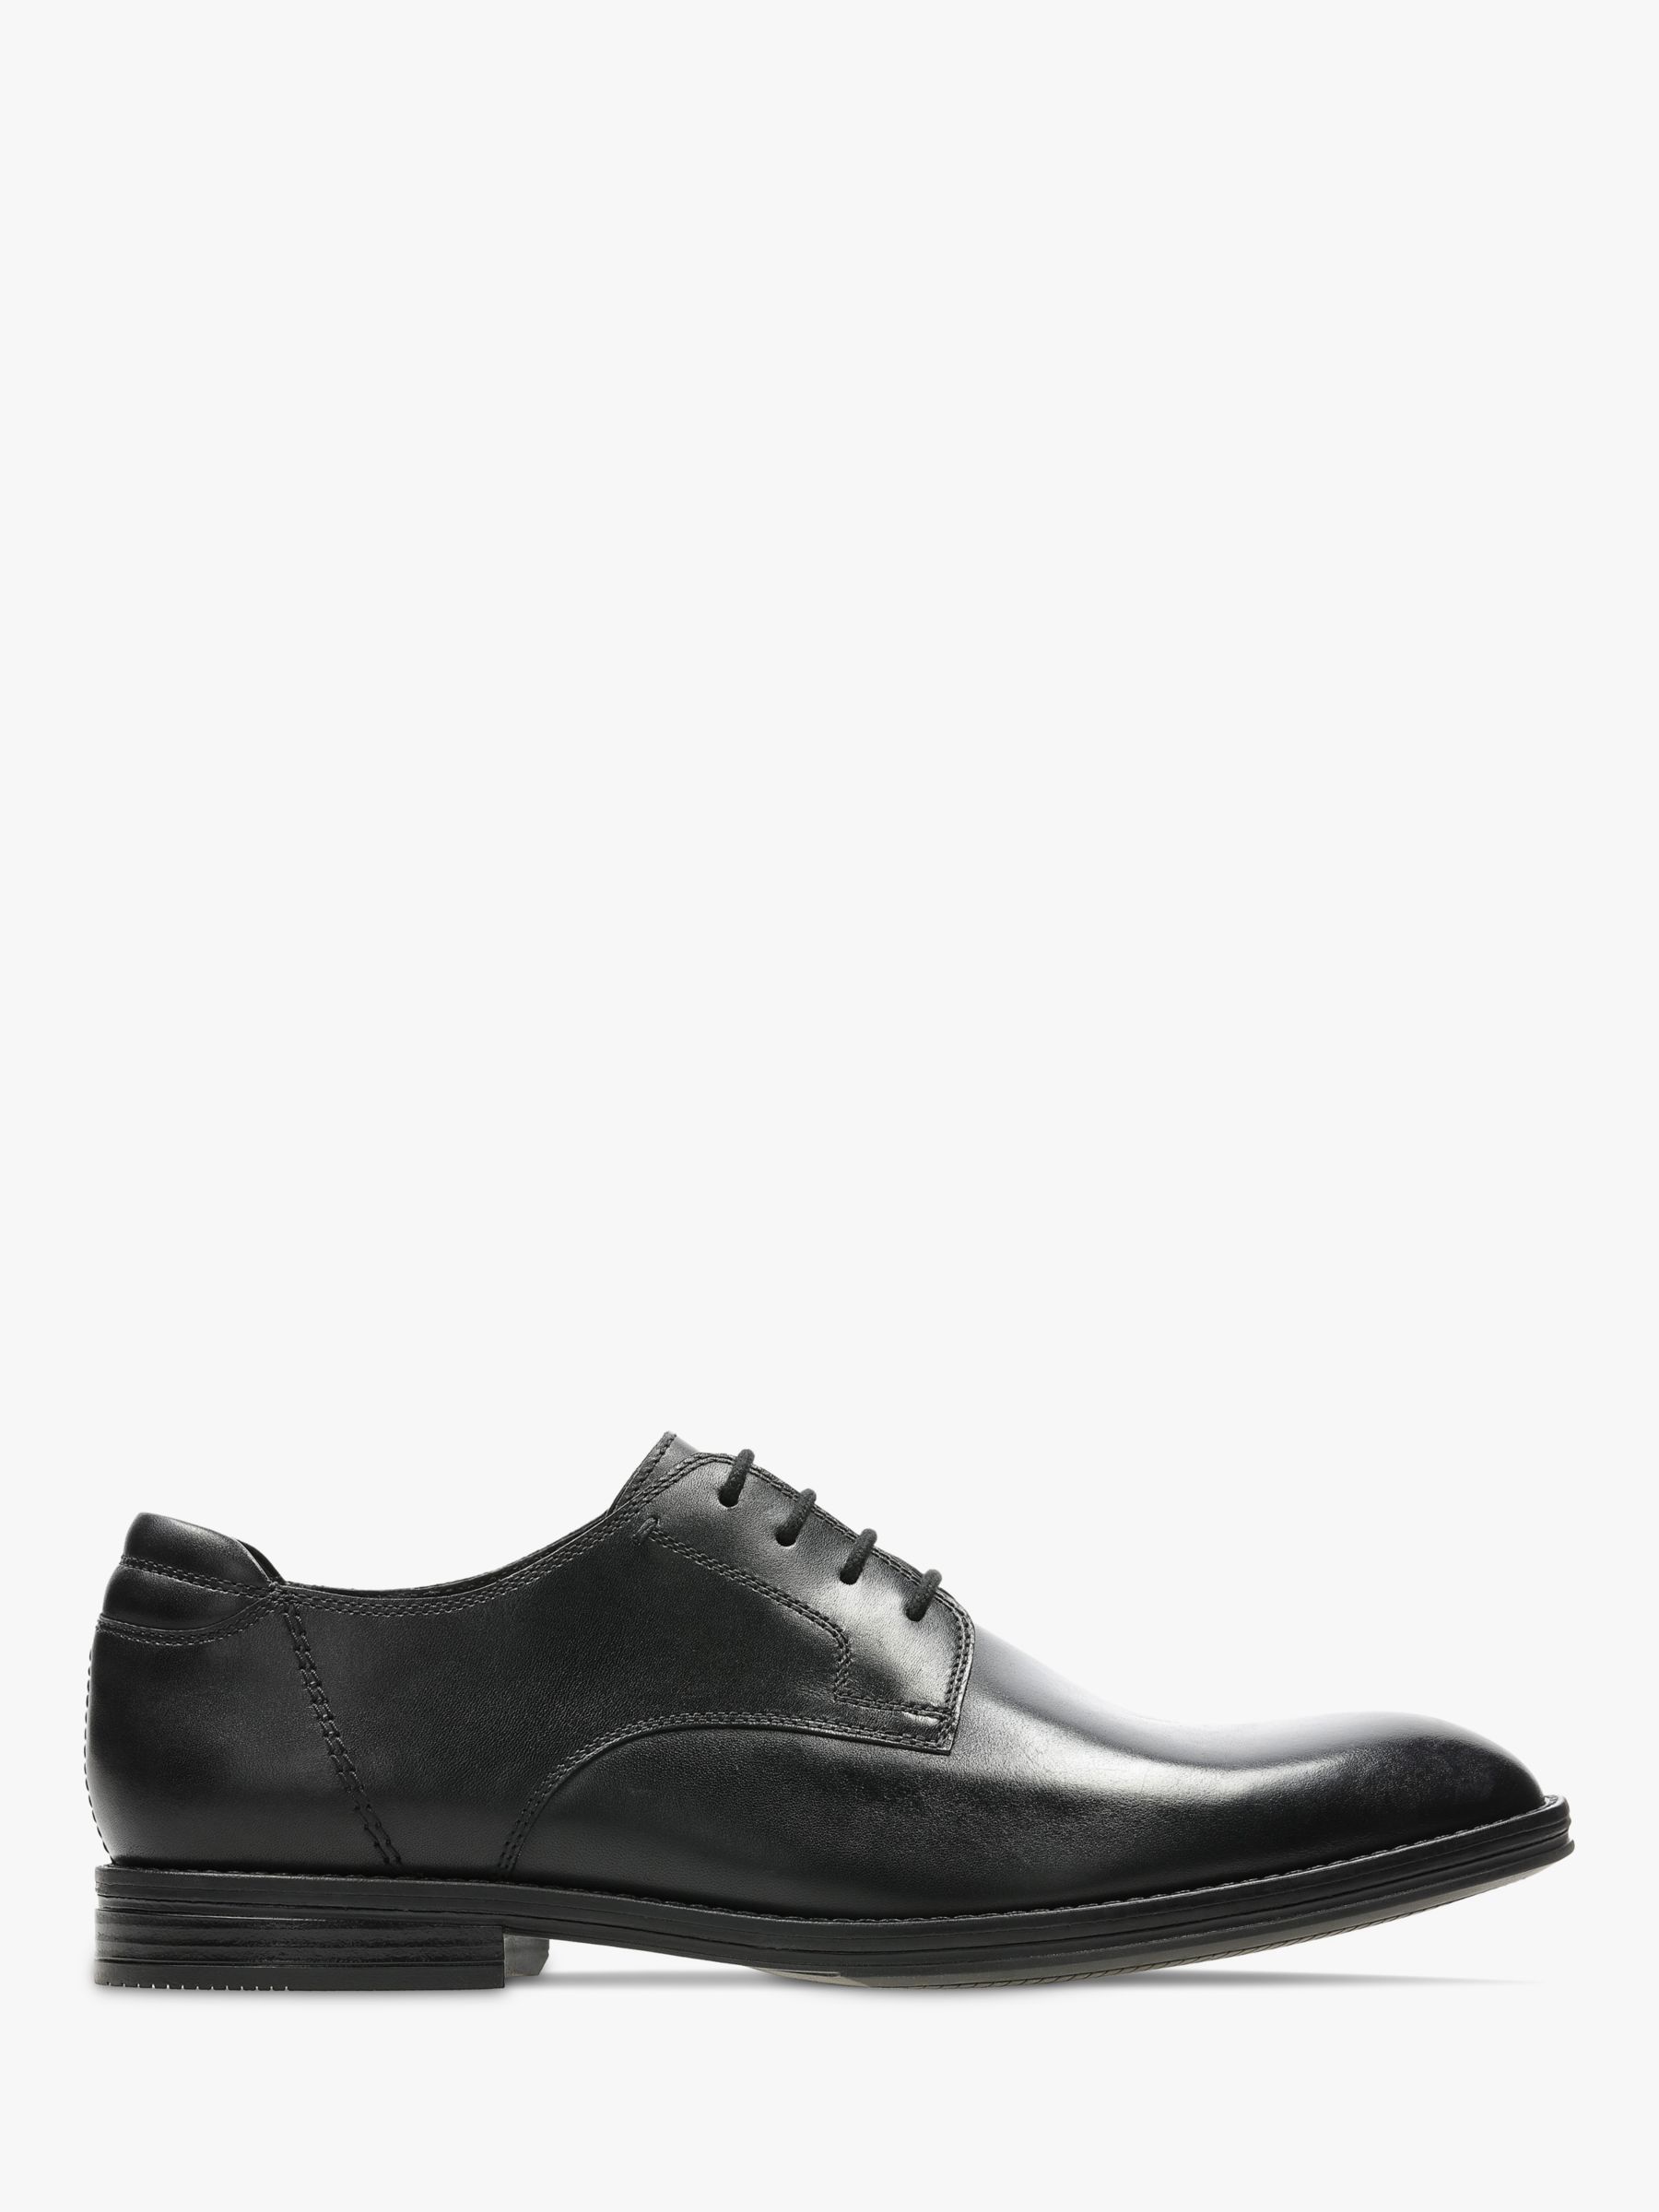 Clarks CitiStride Walk Leather Shoes, Black at John Lewis & Partners